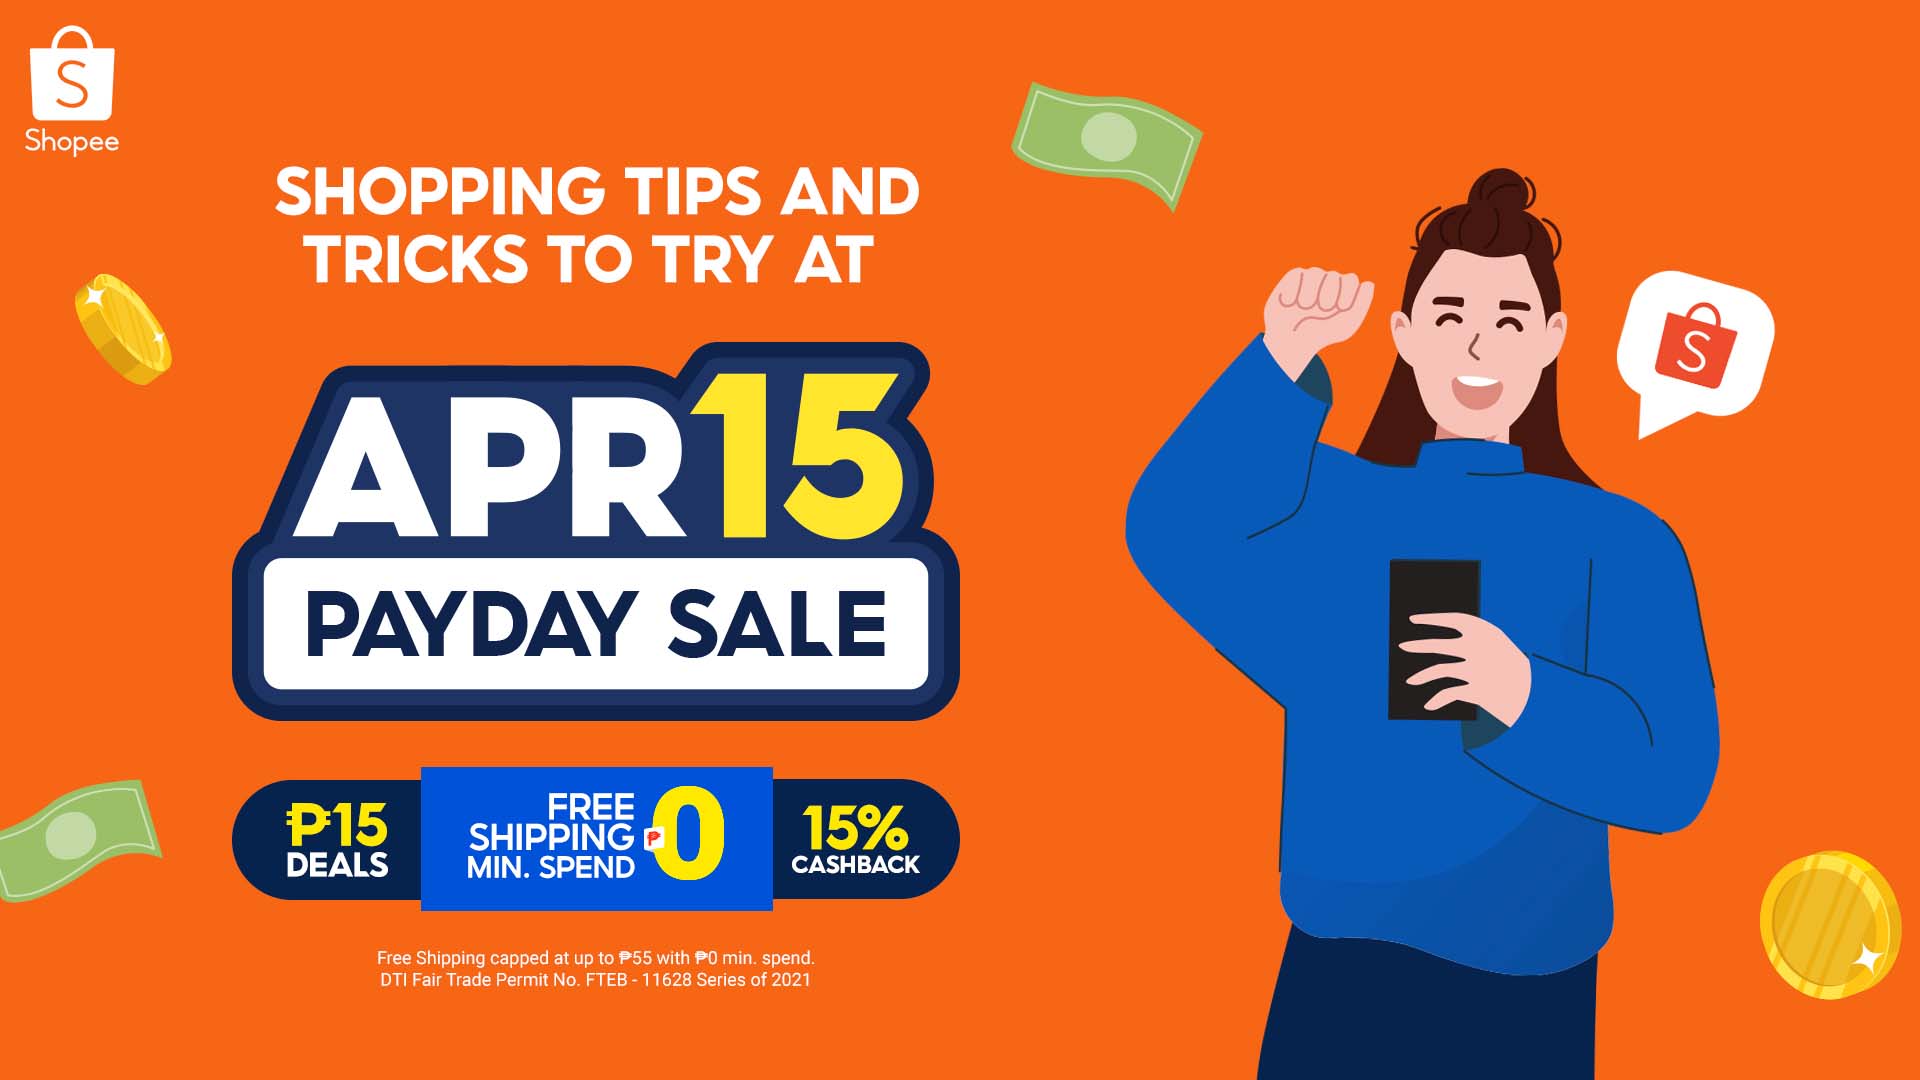 Don’t forget these tips and tricks when shopping online at Shopee’s 4.15 Payday Sale!